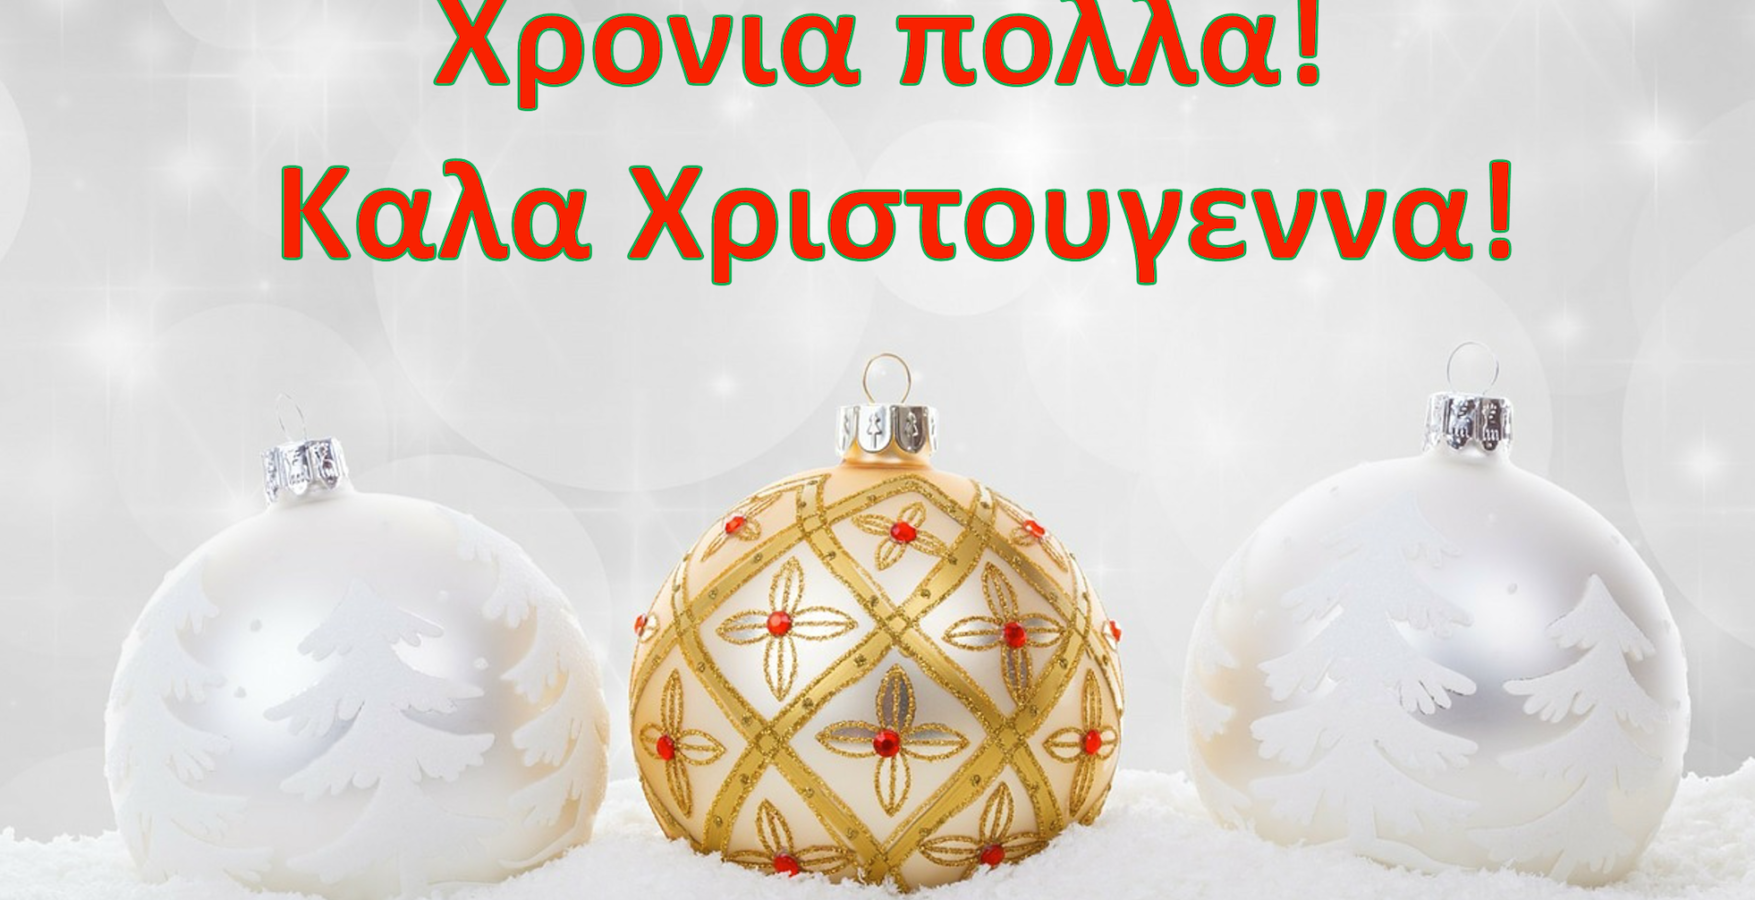 How To Say 'Merry Christmas' In Greek